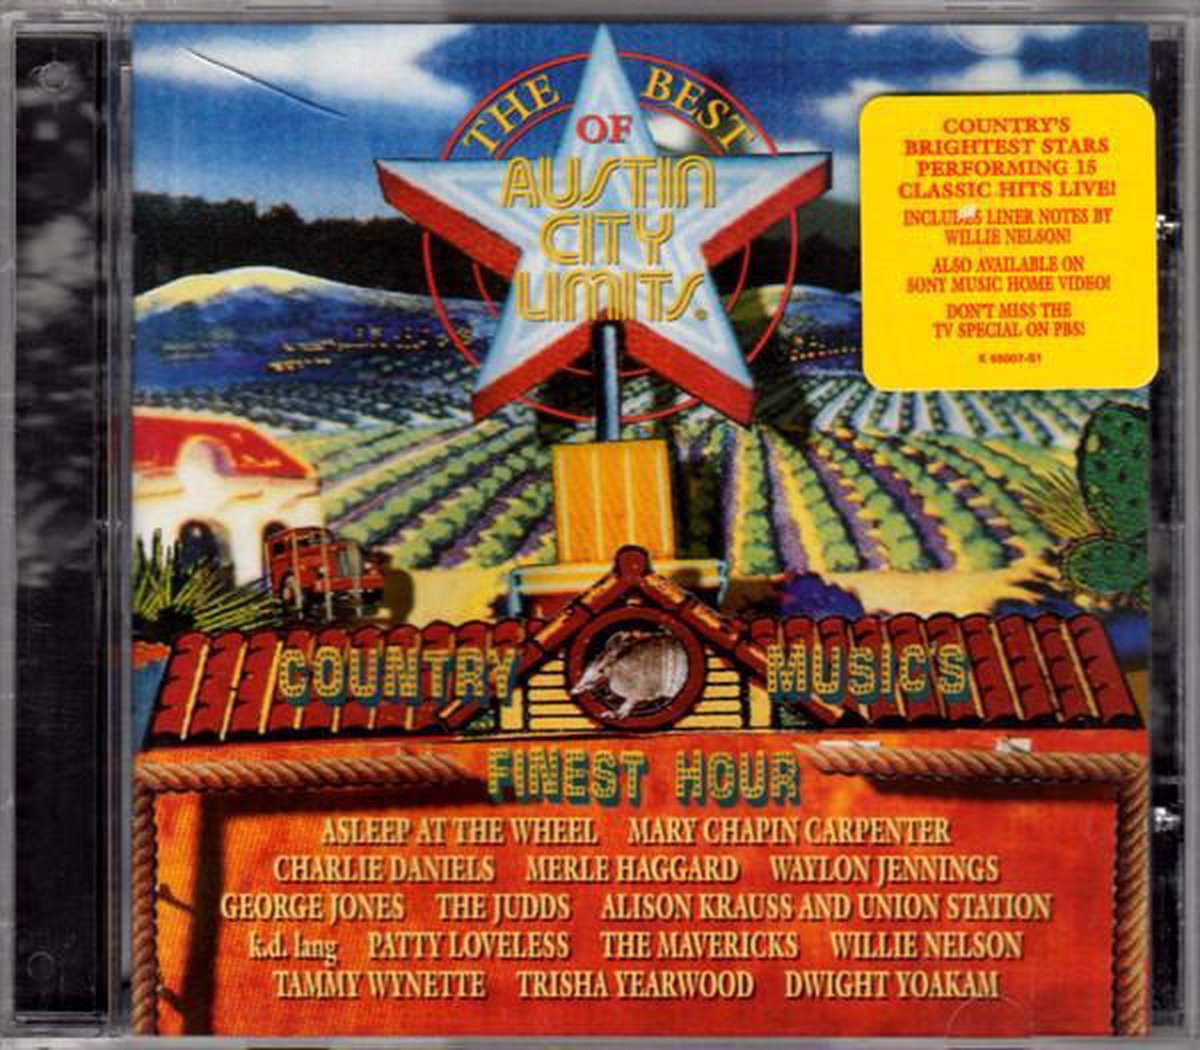 The Best Of Austin City Limits: Country Music's... - various artists